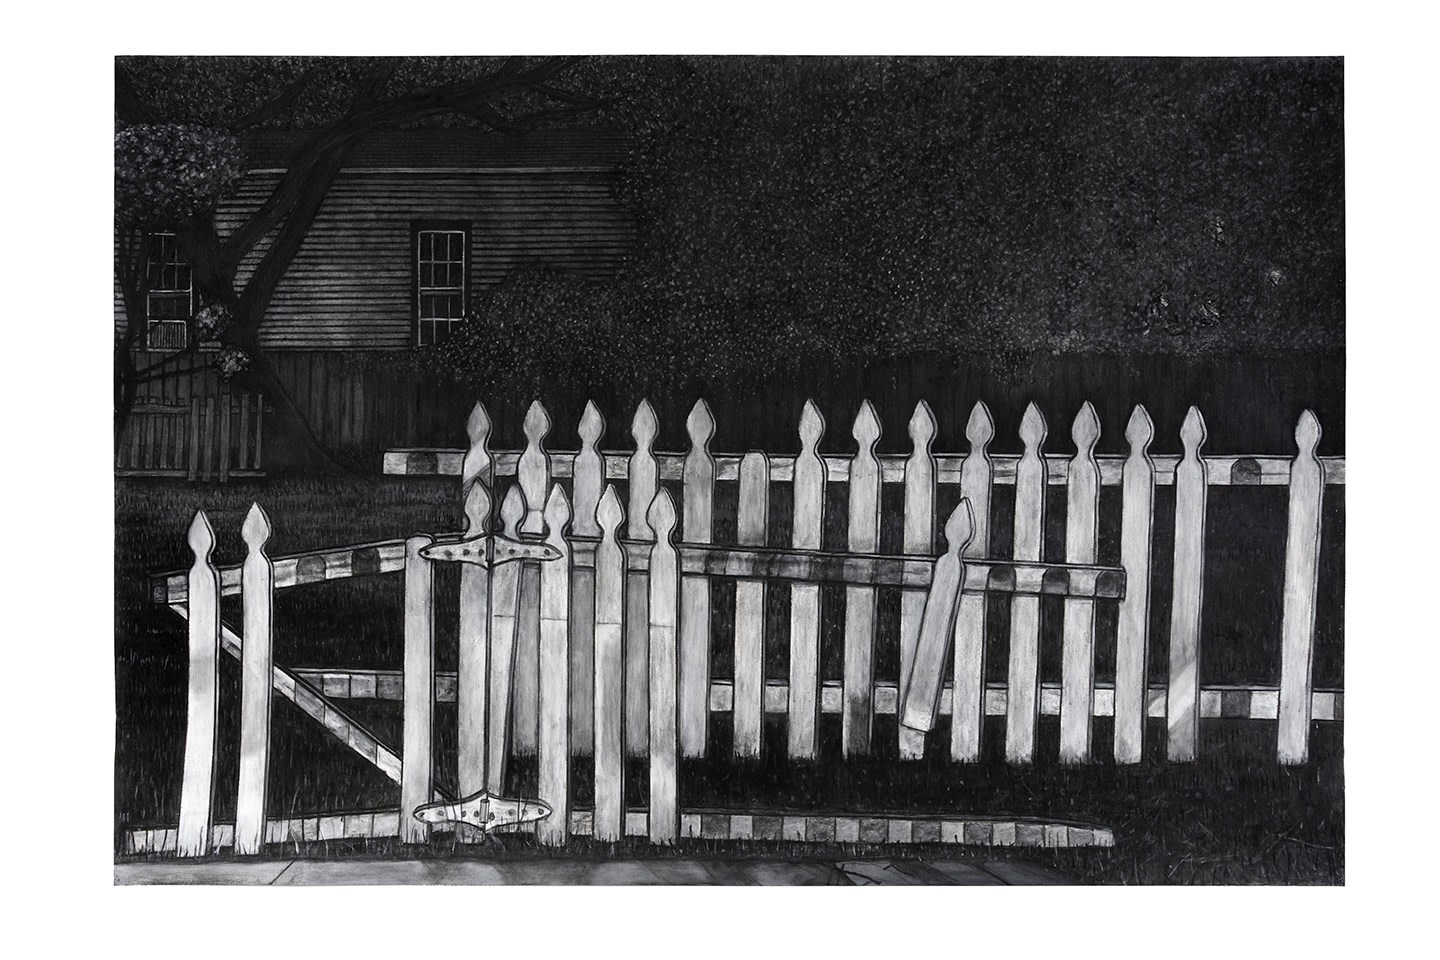 Broken Dreams (Tattered White Picket Fence), 2020-2021
Charcoal and Acrylic on Paper
60 &amp;times; 90 inches